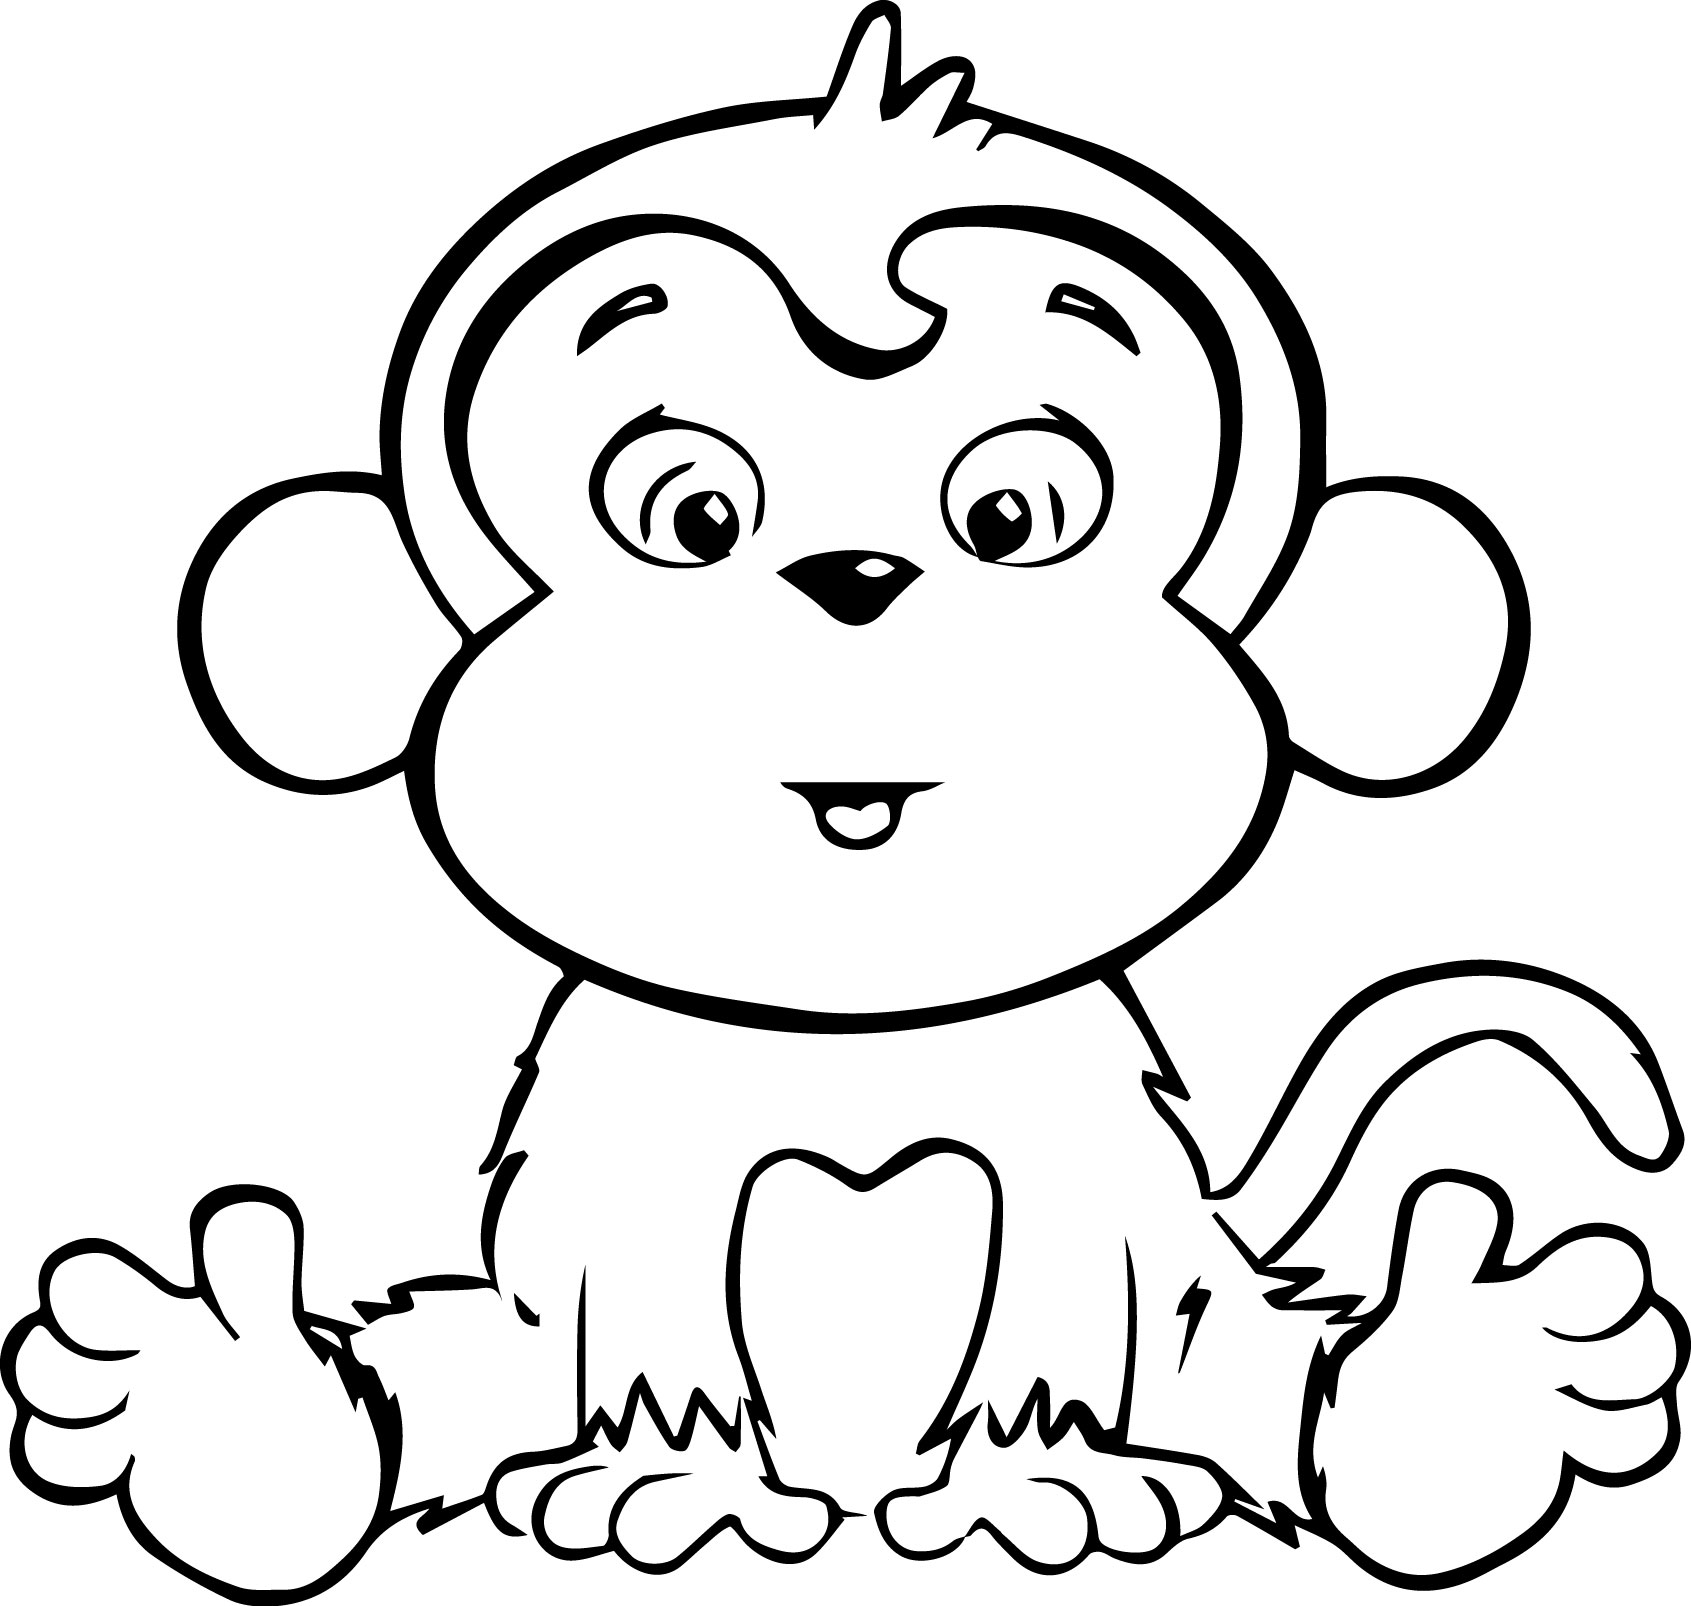 Colouring Monkey - ClipArt Best